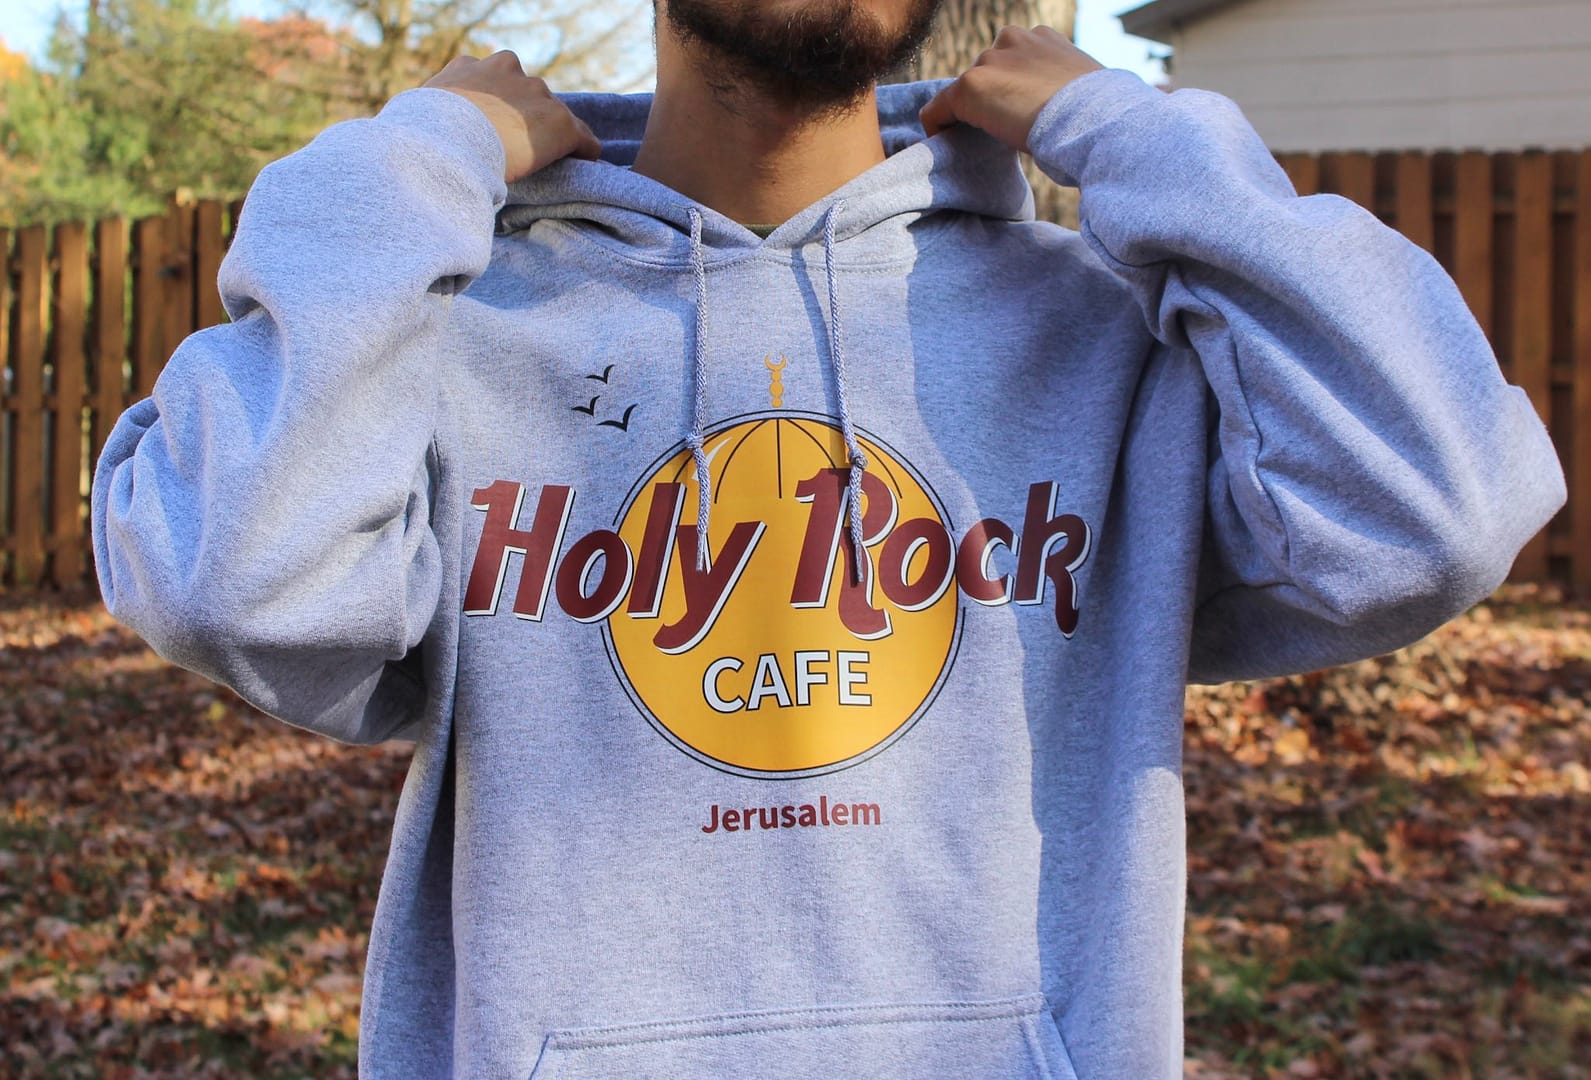 the model wearing the holy rock hoodie